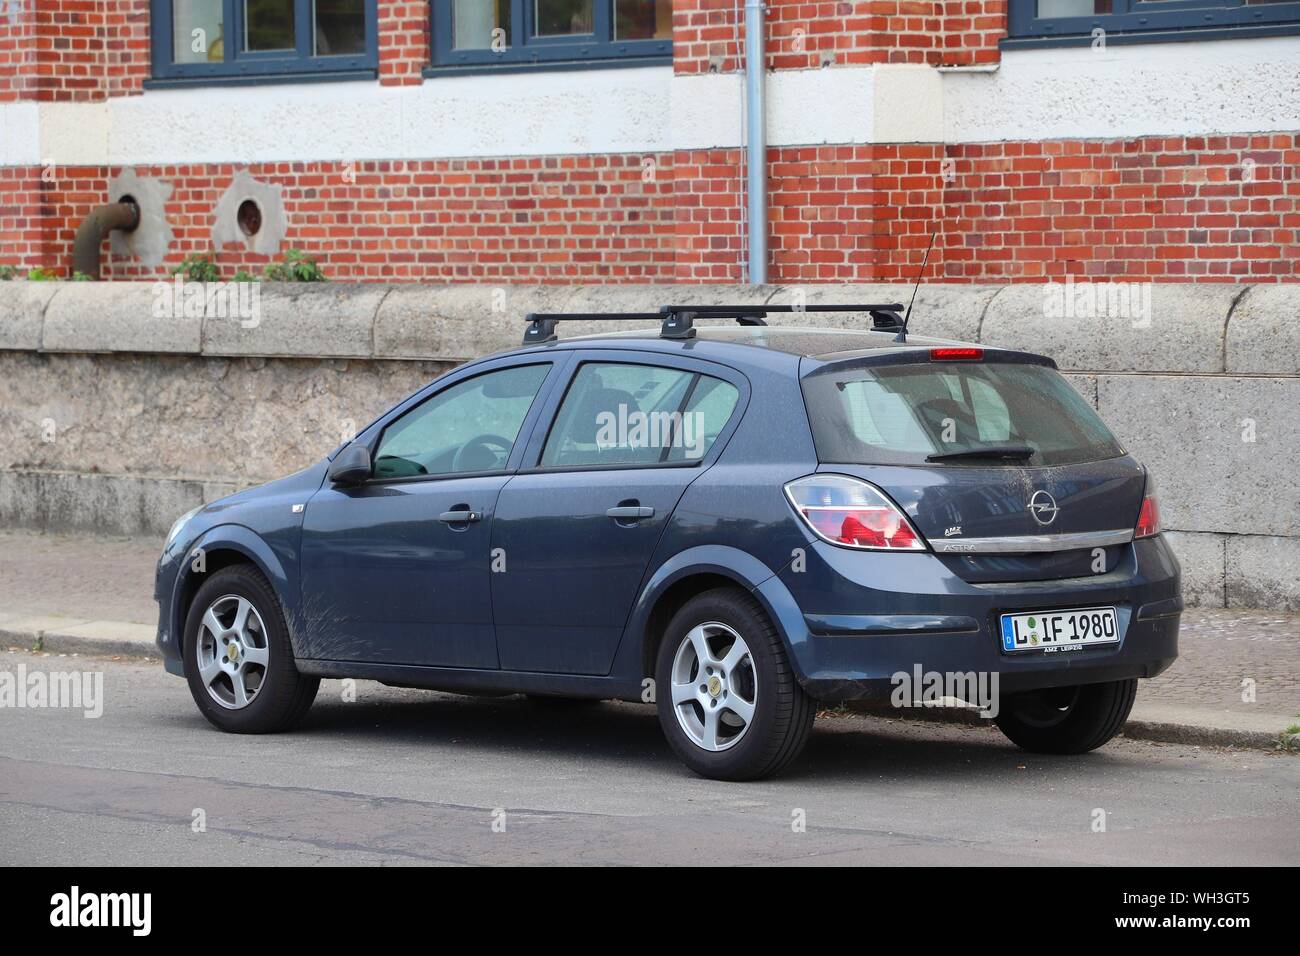 LEIPZIG, GERMANY - MAY 9, 2018: Opel Astra compact hatchback car parked in Germany. There were 45.8 million cars registered in Germany (as of 2017). Stock Photo